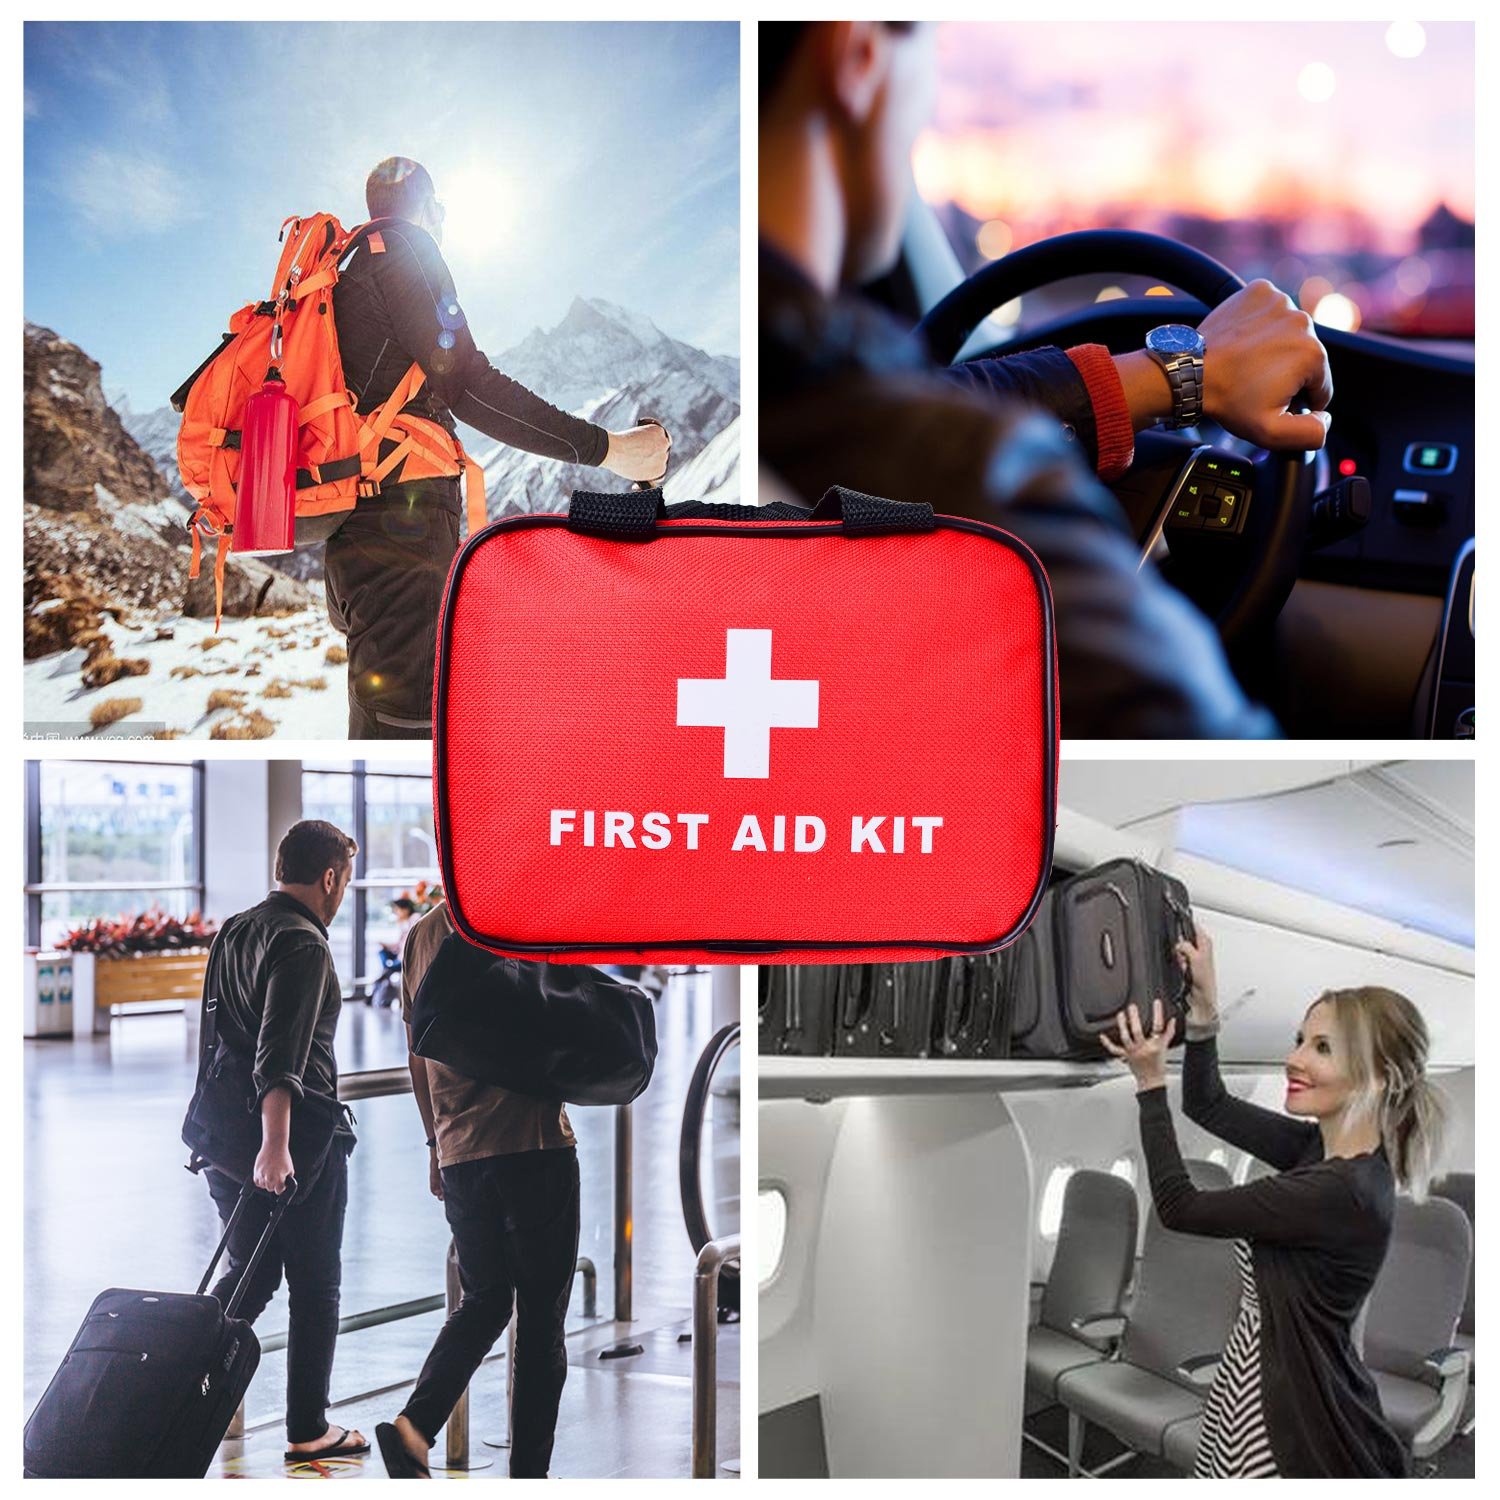 SlimK Small First Aid Kit for Car Travel & Outdoor Emergency Like Minor Cuts, Scratch, Burns & Sprain - 112 Pieces of Premium Sterile Emergency Kit First Aid Supplies - Compact & Lightweight Bag Red